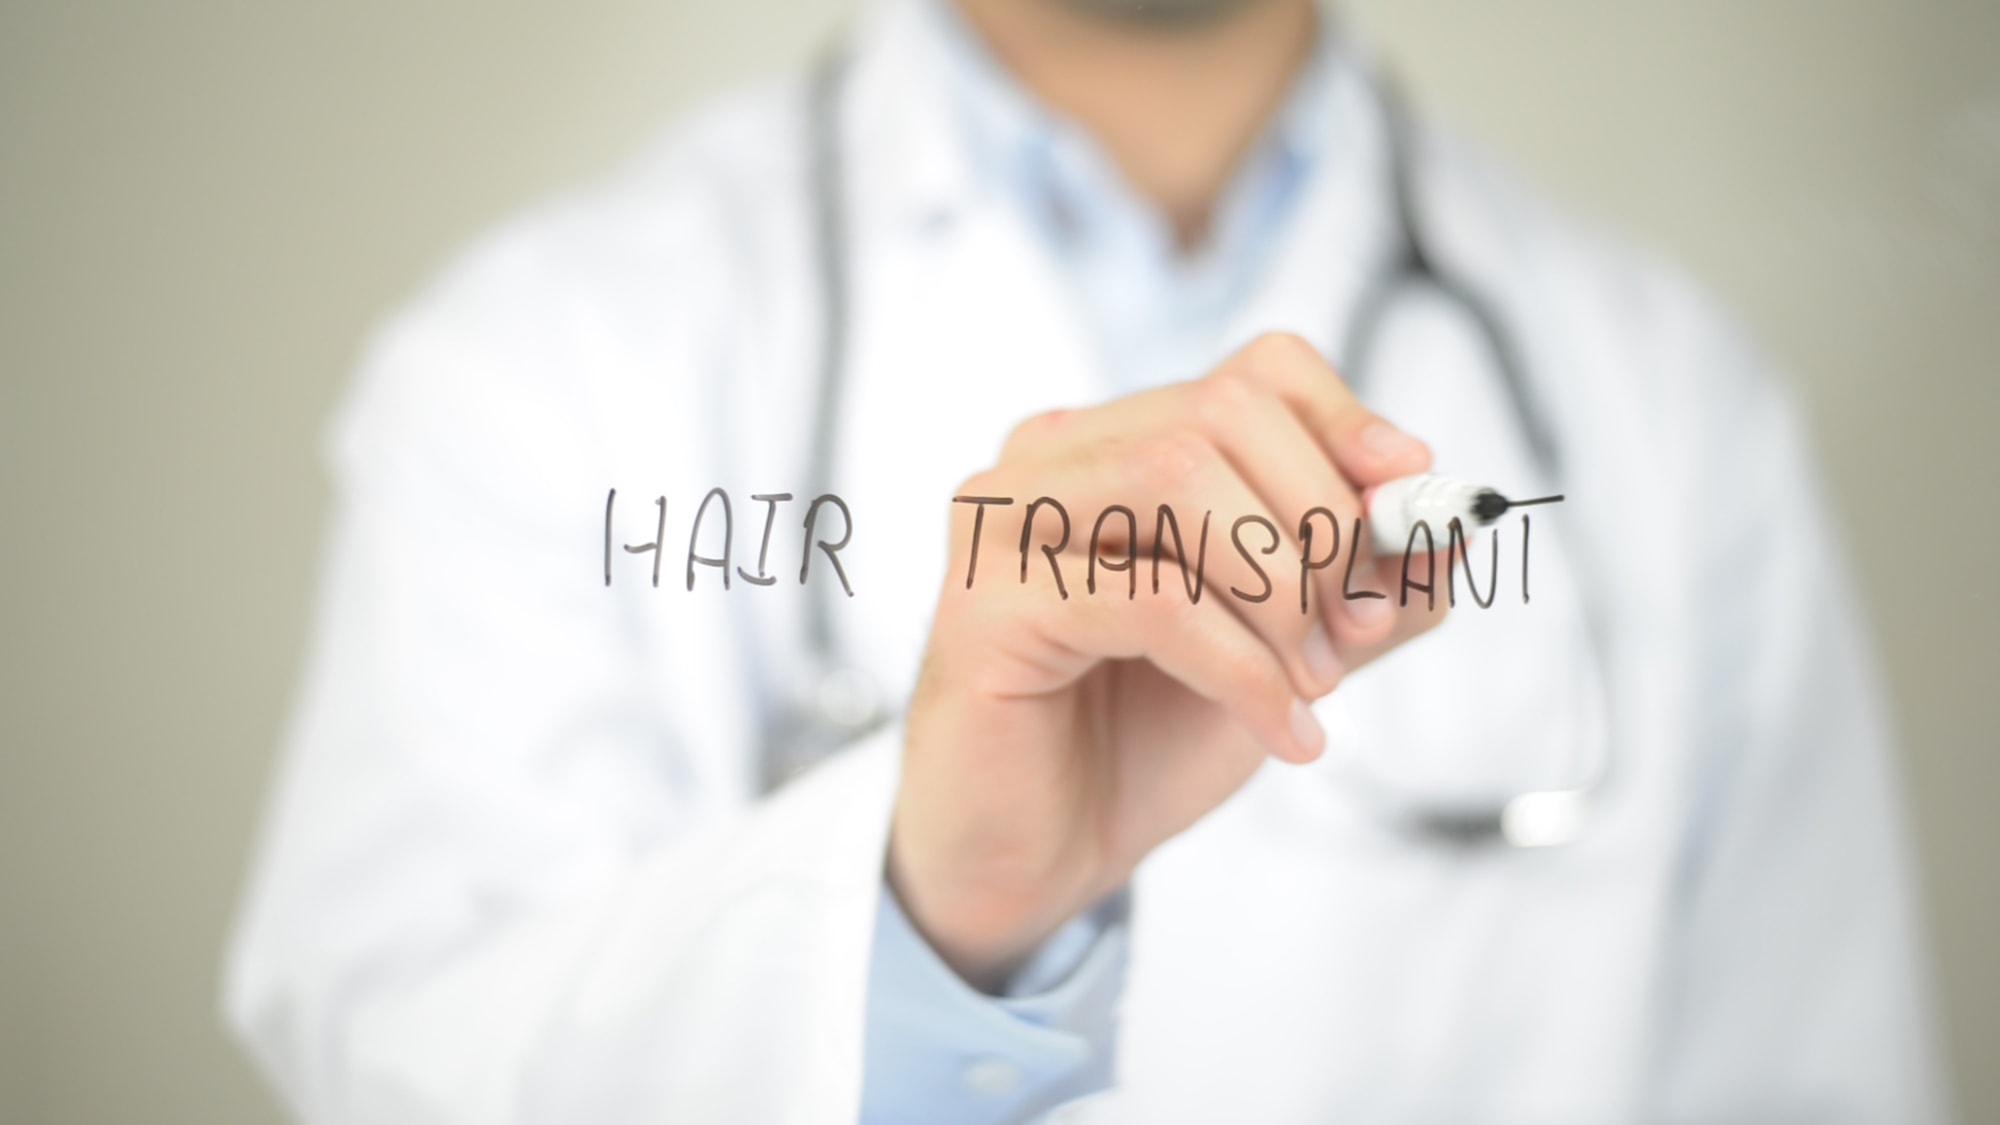 FUE hair transplant explained by surgeon, Dr. Parsa Mohebi